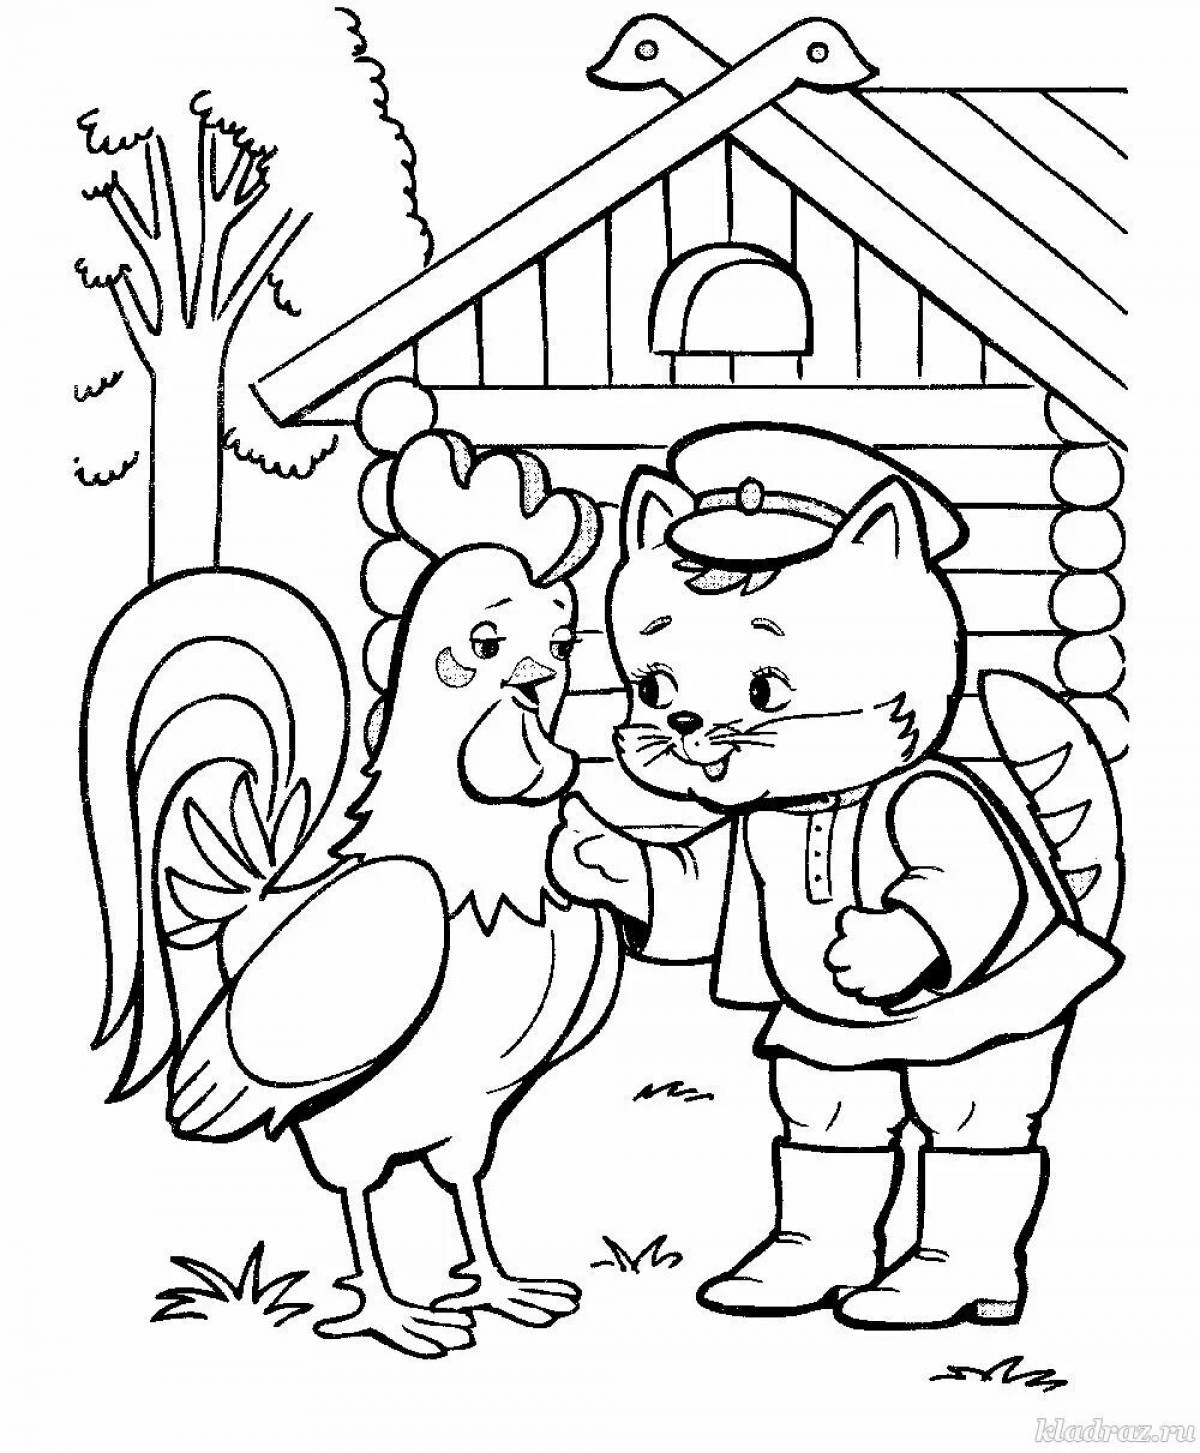 Glitter cat coloring page